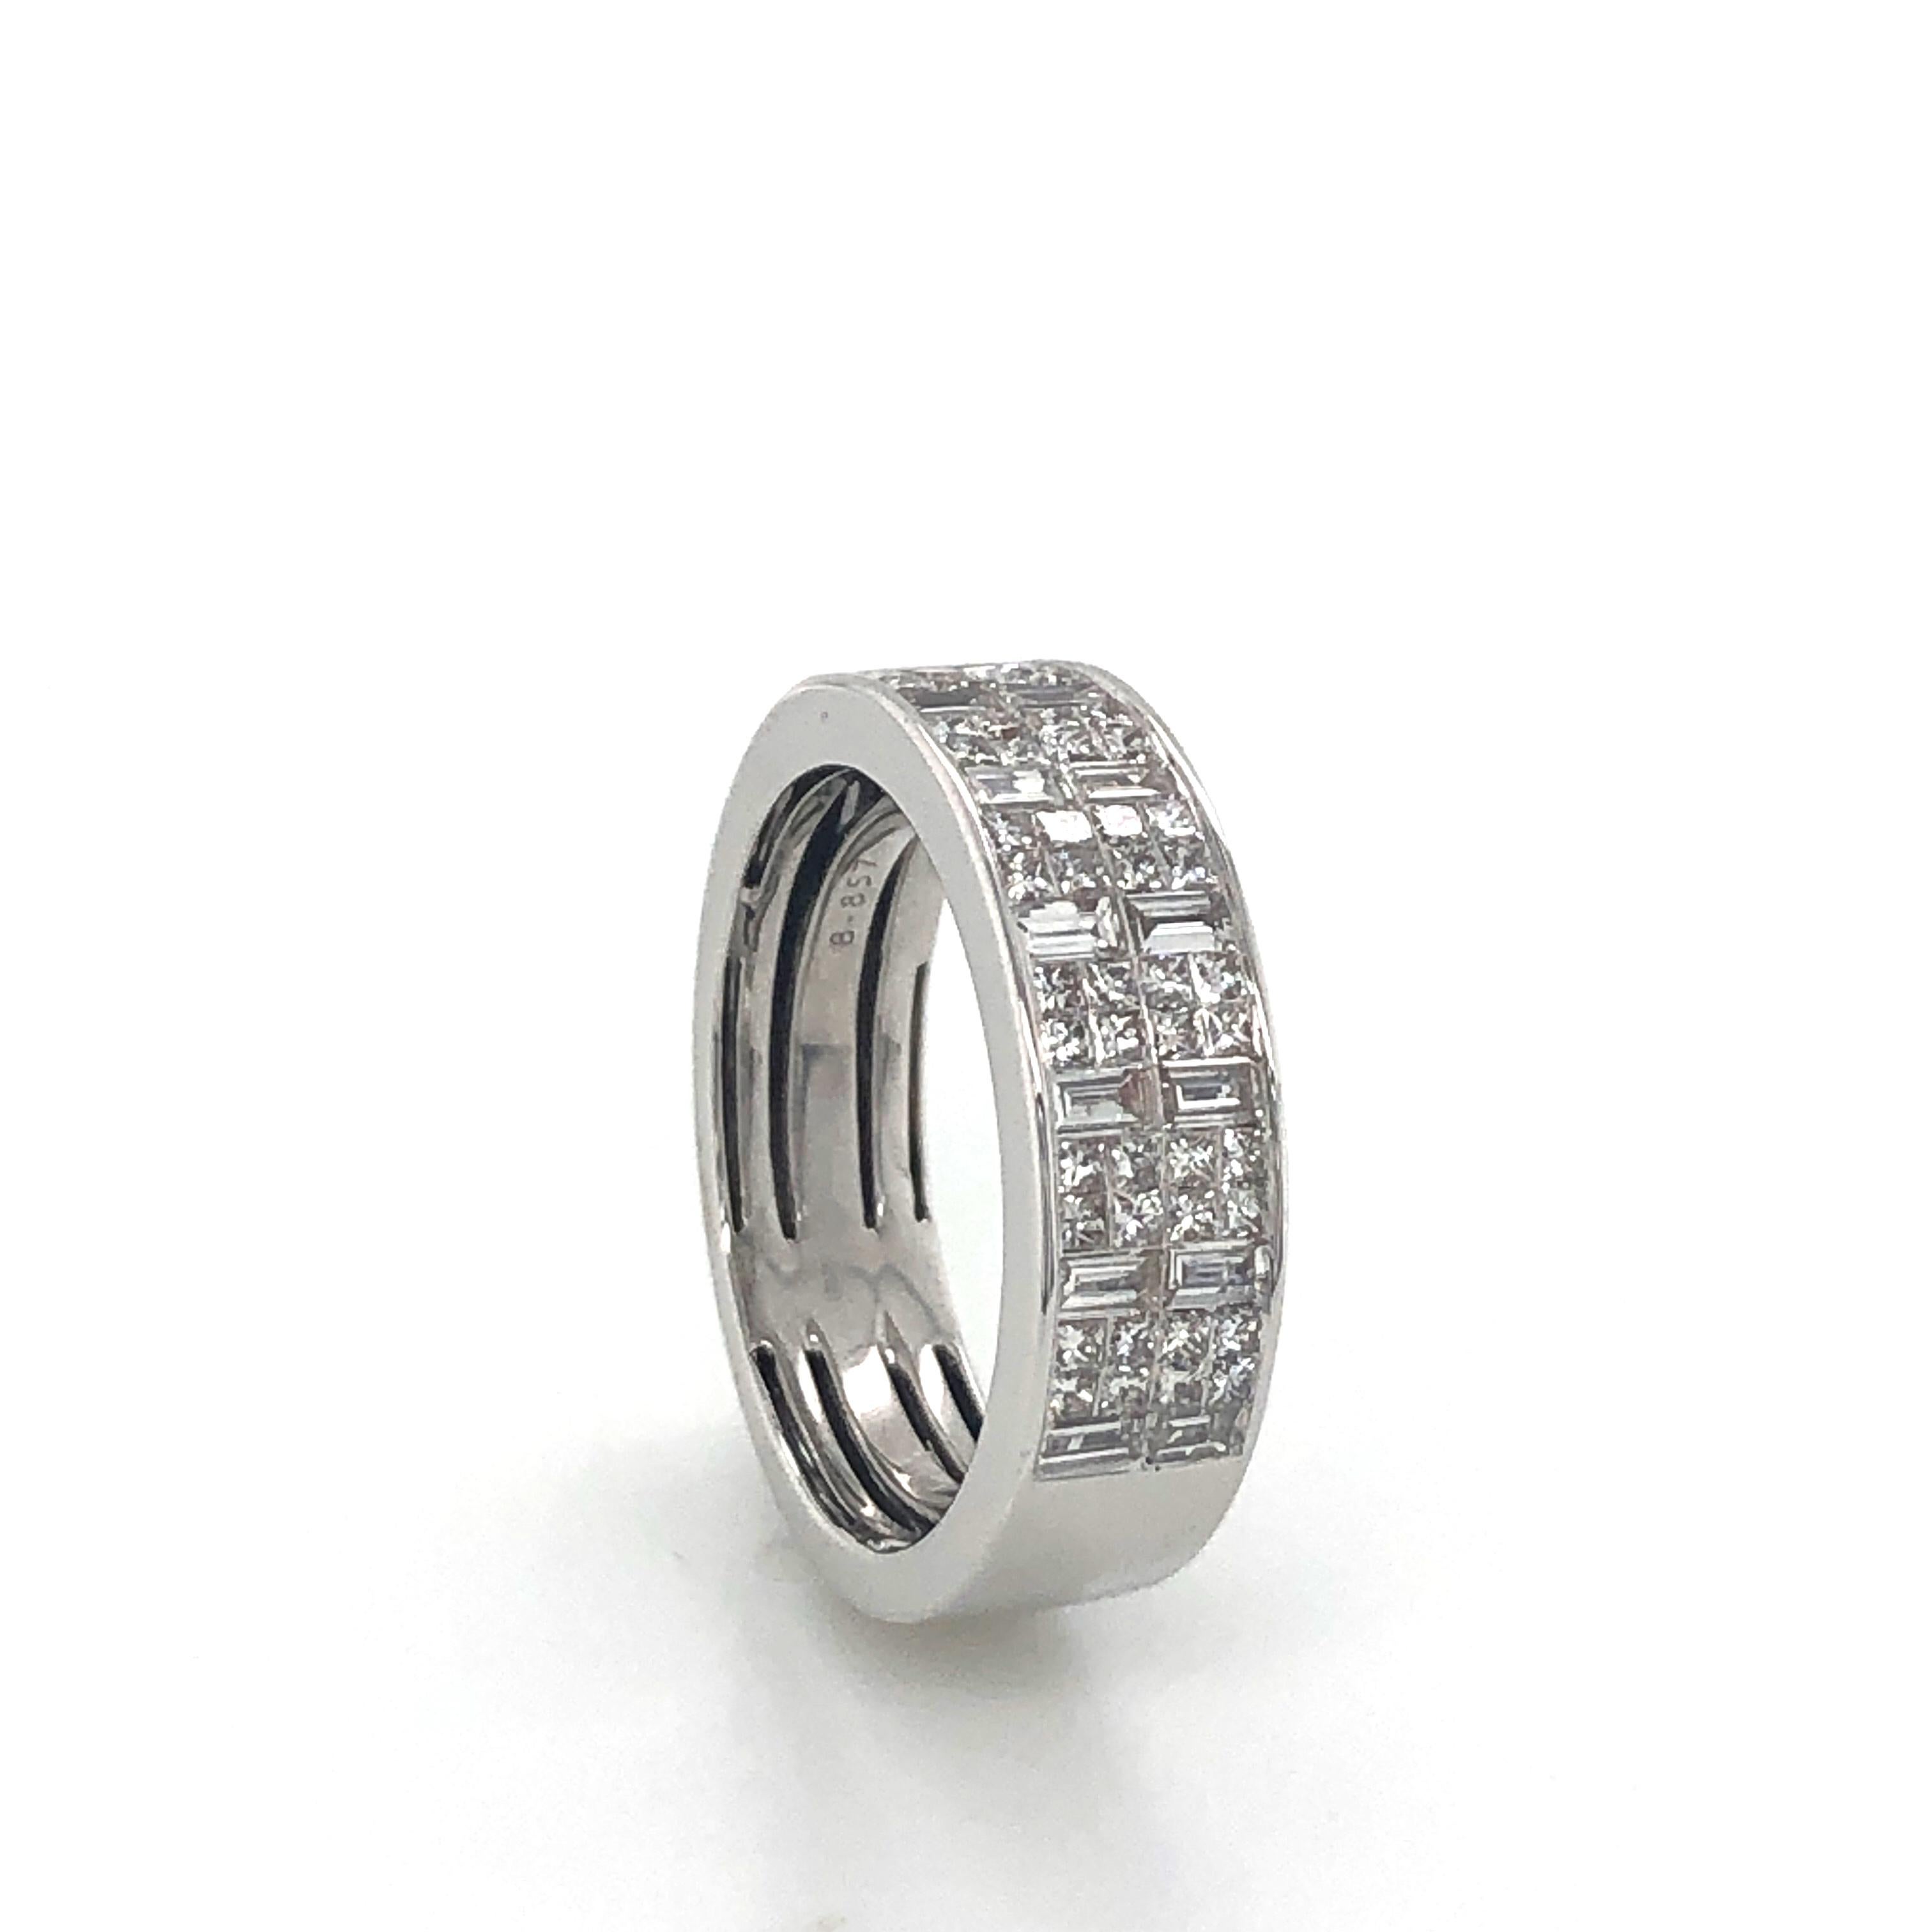 White gold Ring 18K 6.2 grams
White diamond baguette Cut and princess Cut 1 ct.
Color G Purity SI 
French size 54 
Us size 7